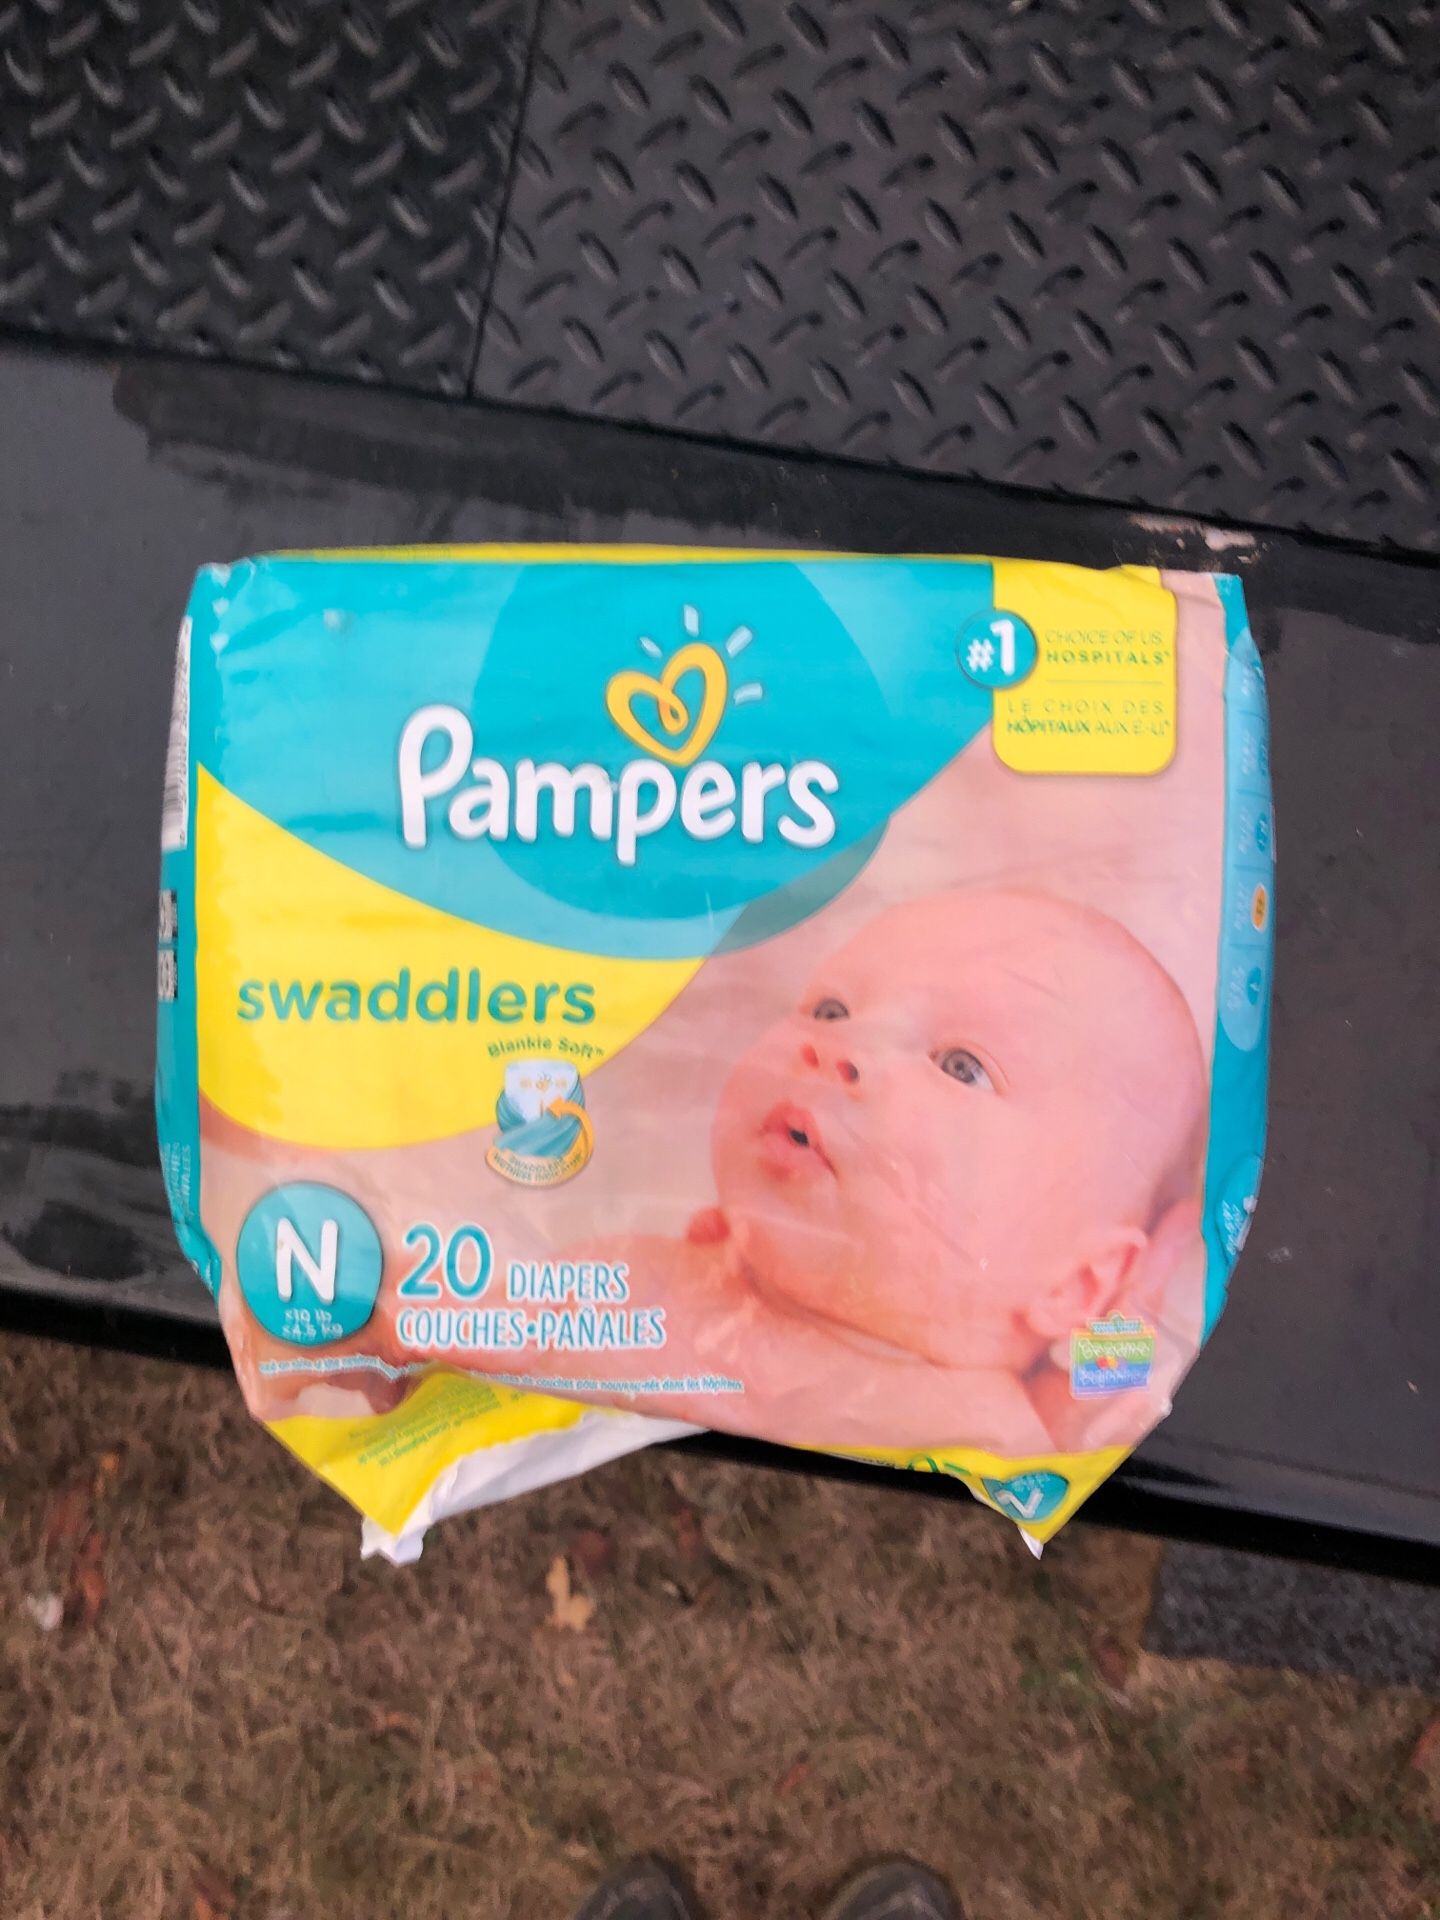 Pampers swaddle her’s newborn 10lbs. /20 diapers included